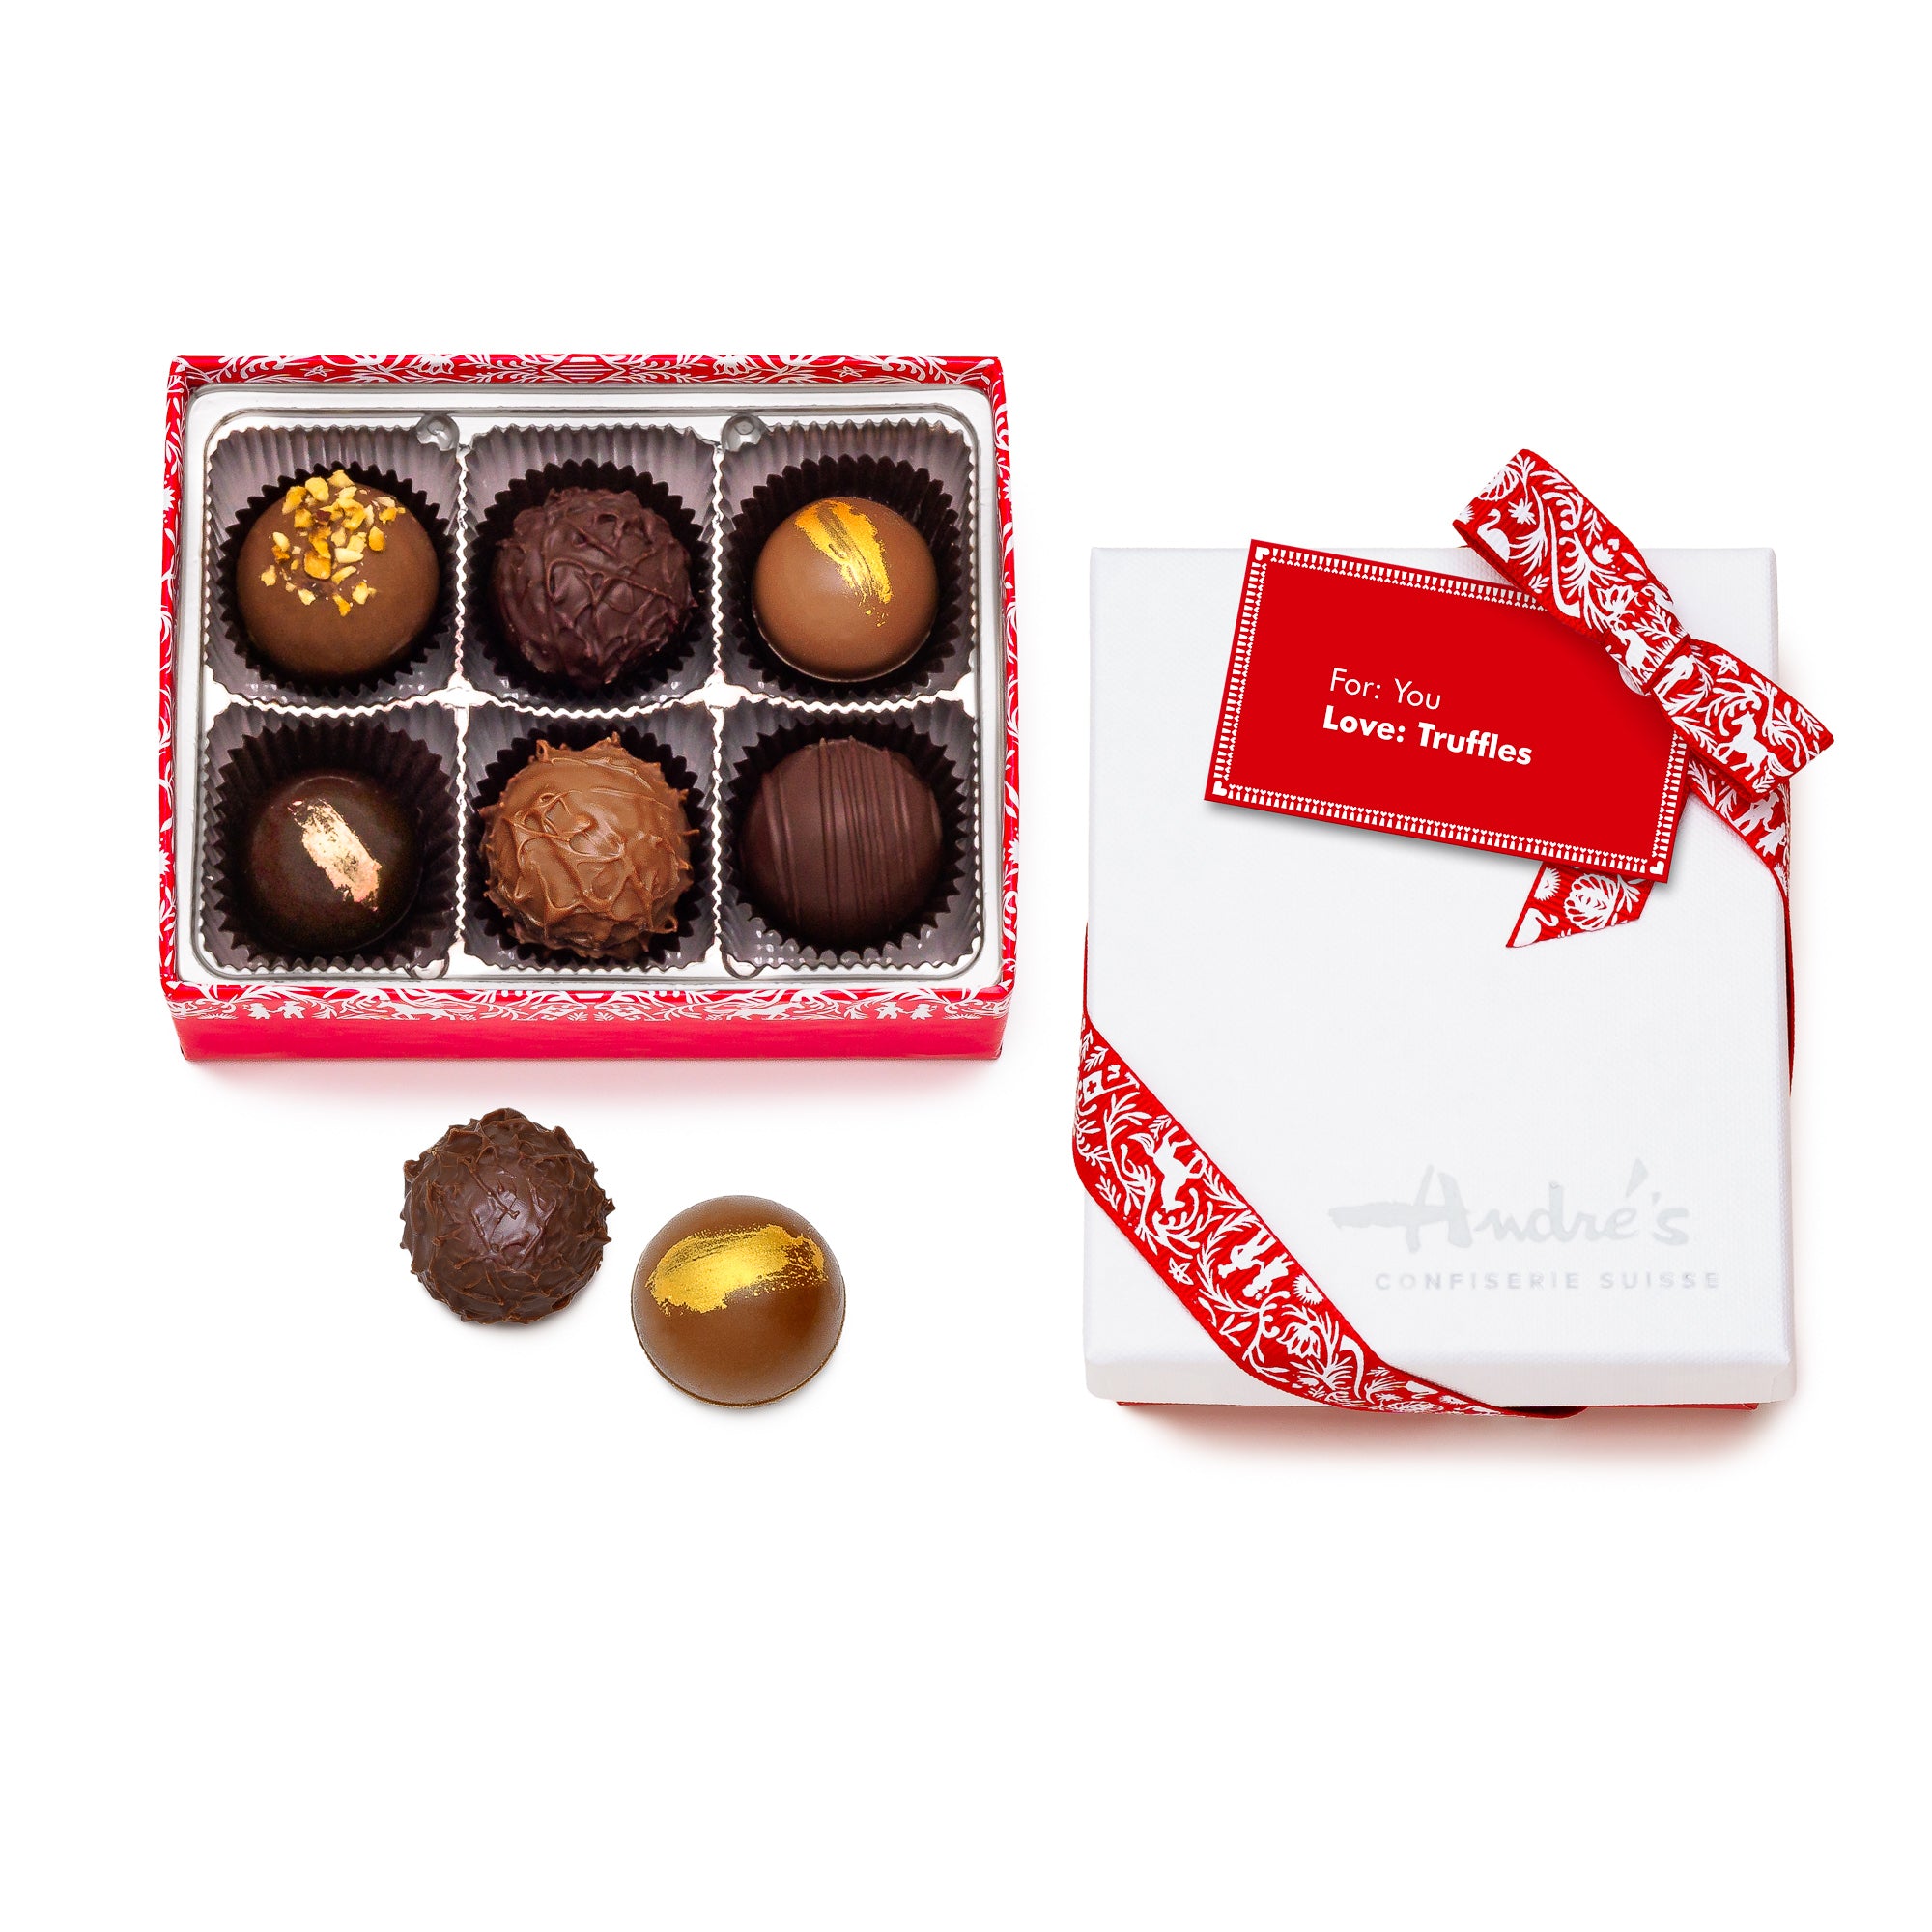 Assorted Truffles "For You"